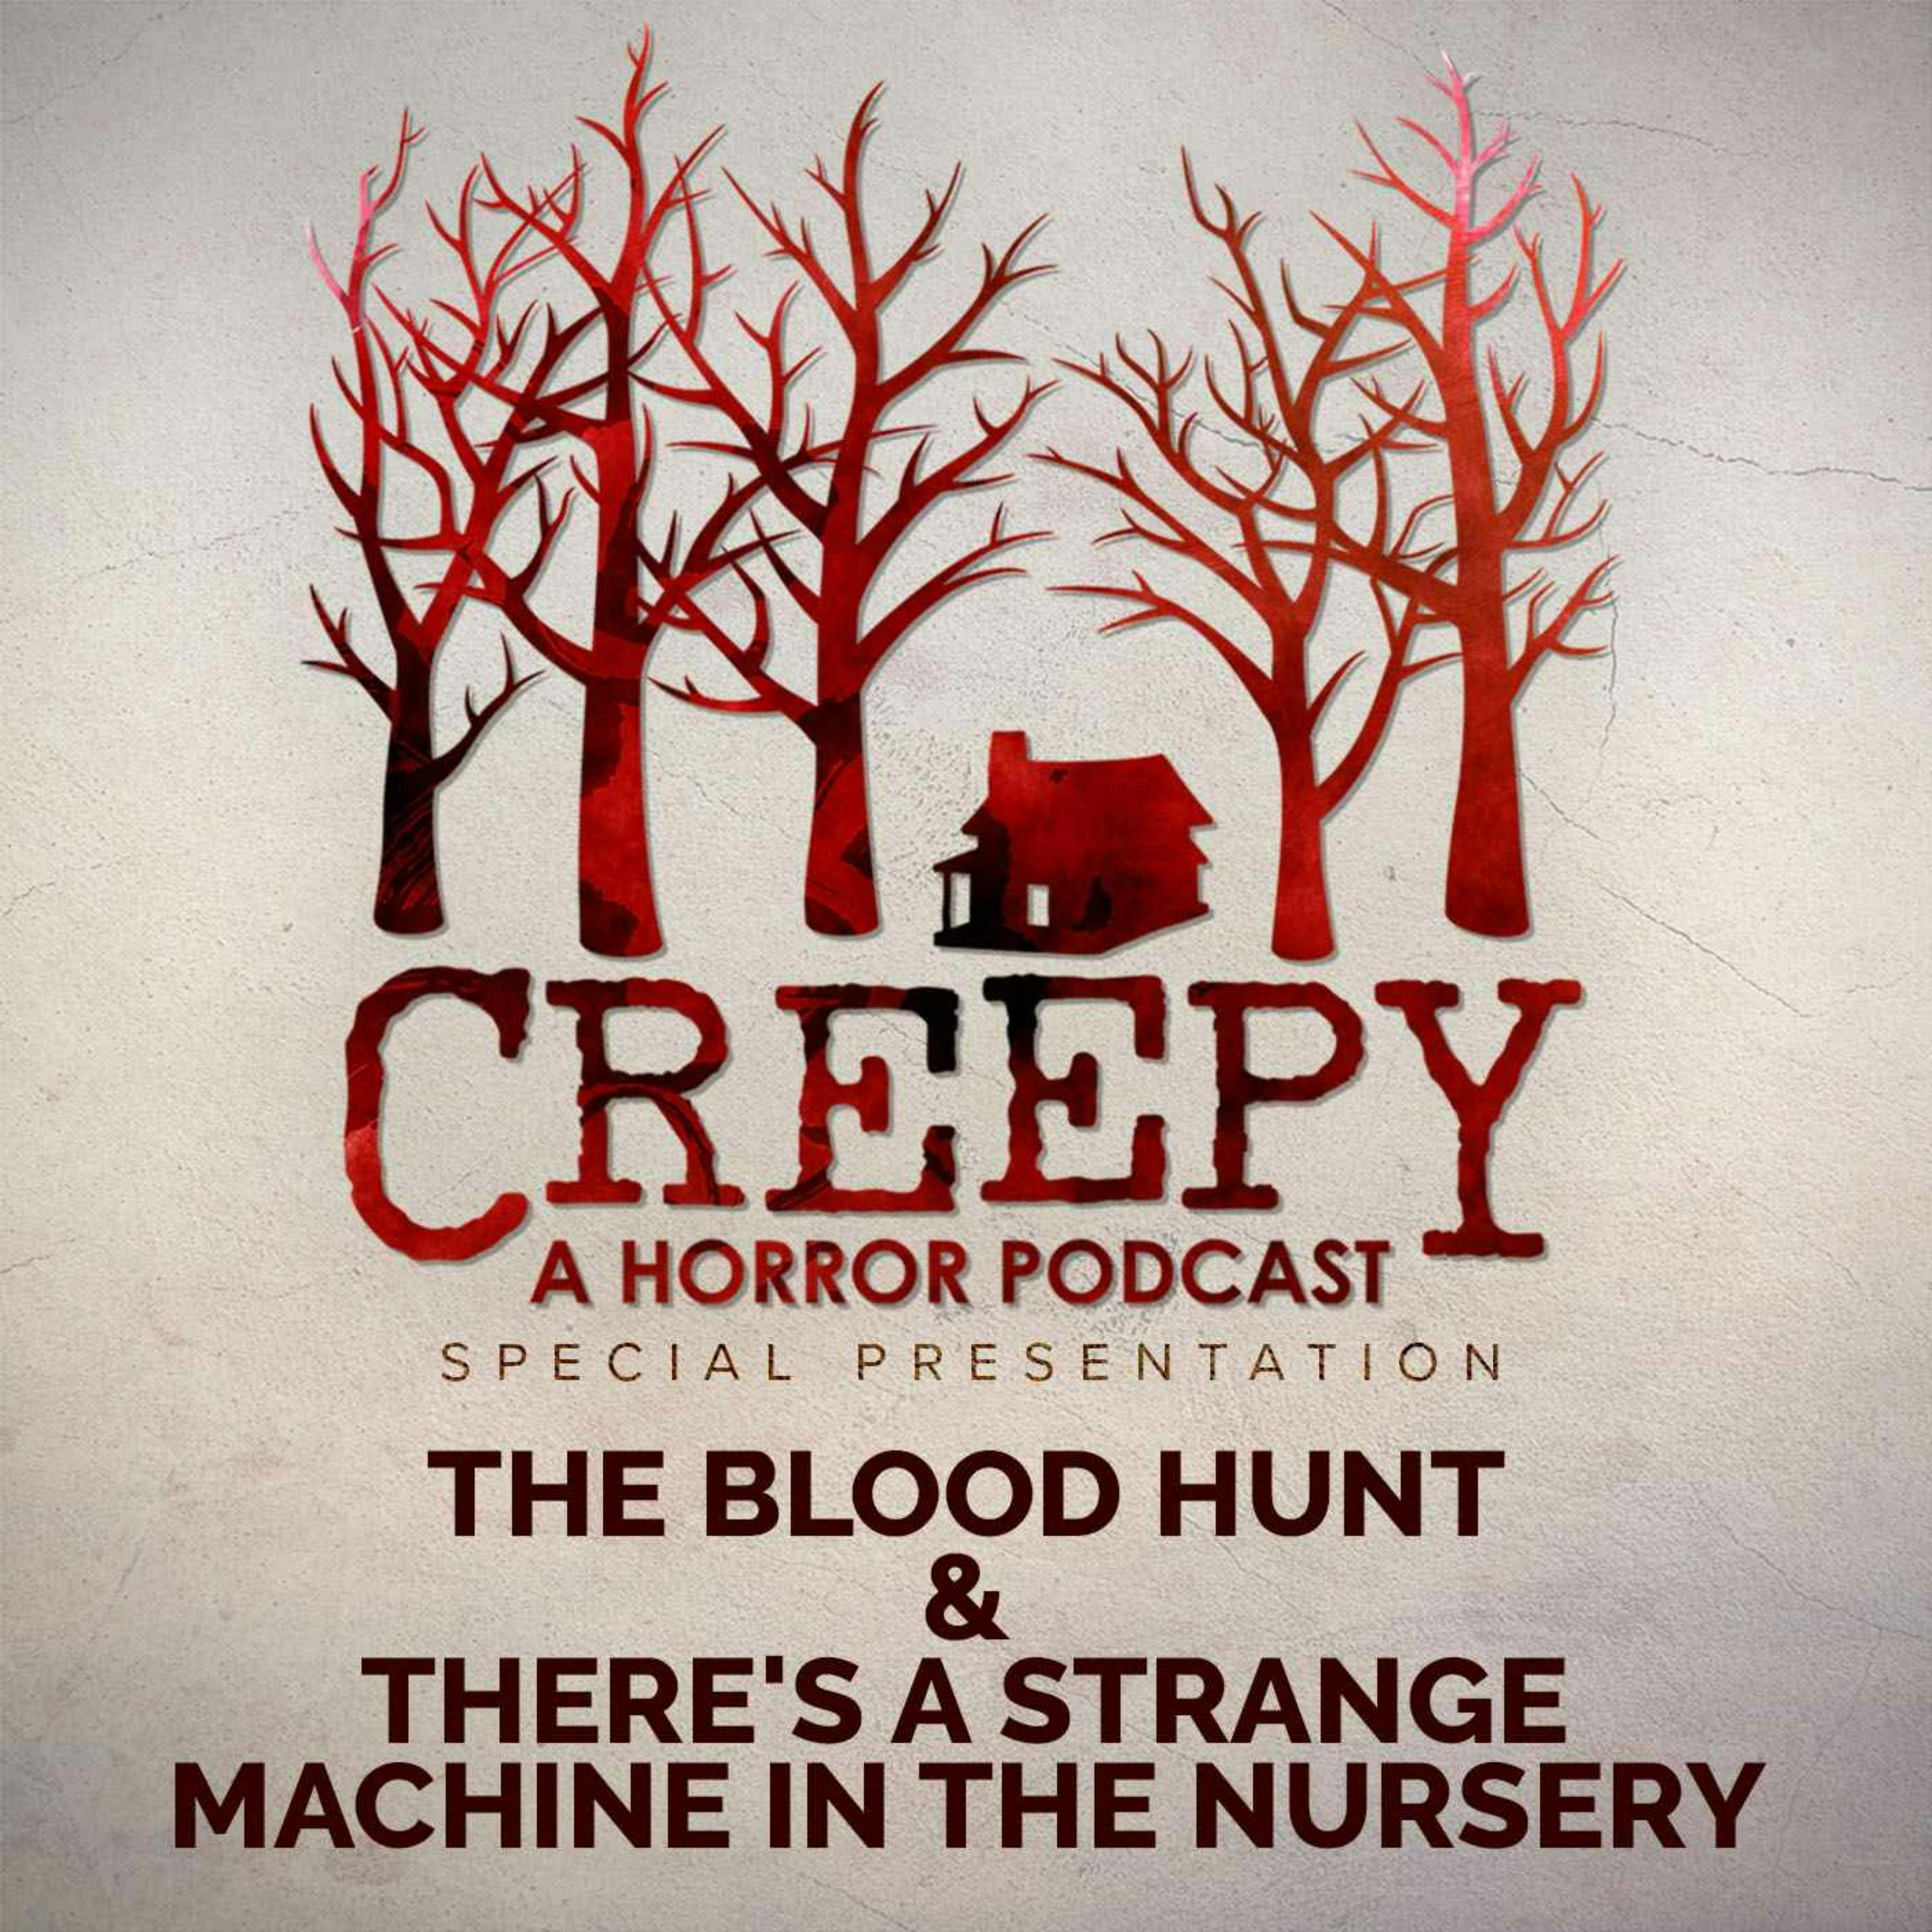 The Blood Hunt & There's A Strange Machine In The Nursery